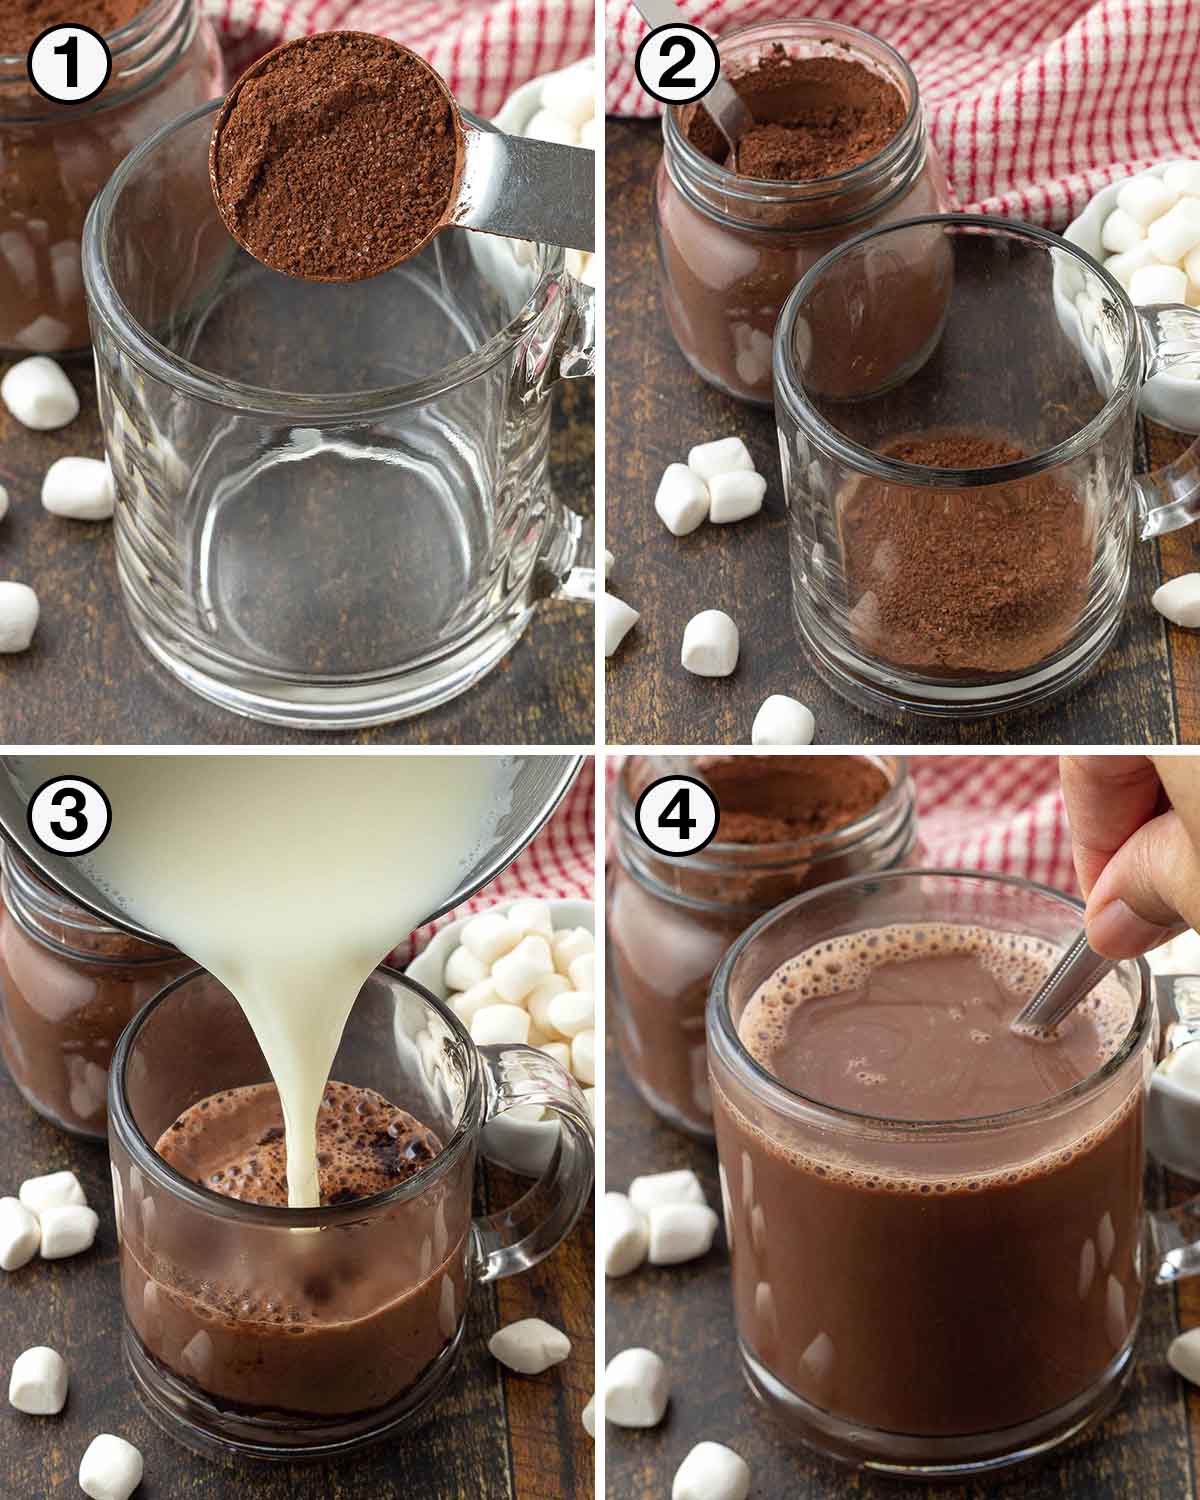 A collage of four images showing the sequence of steps needed to make vegan hot chocolate using a homemade mix.